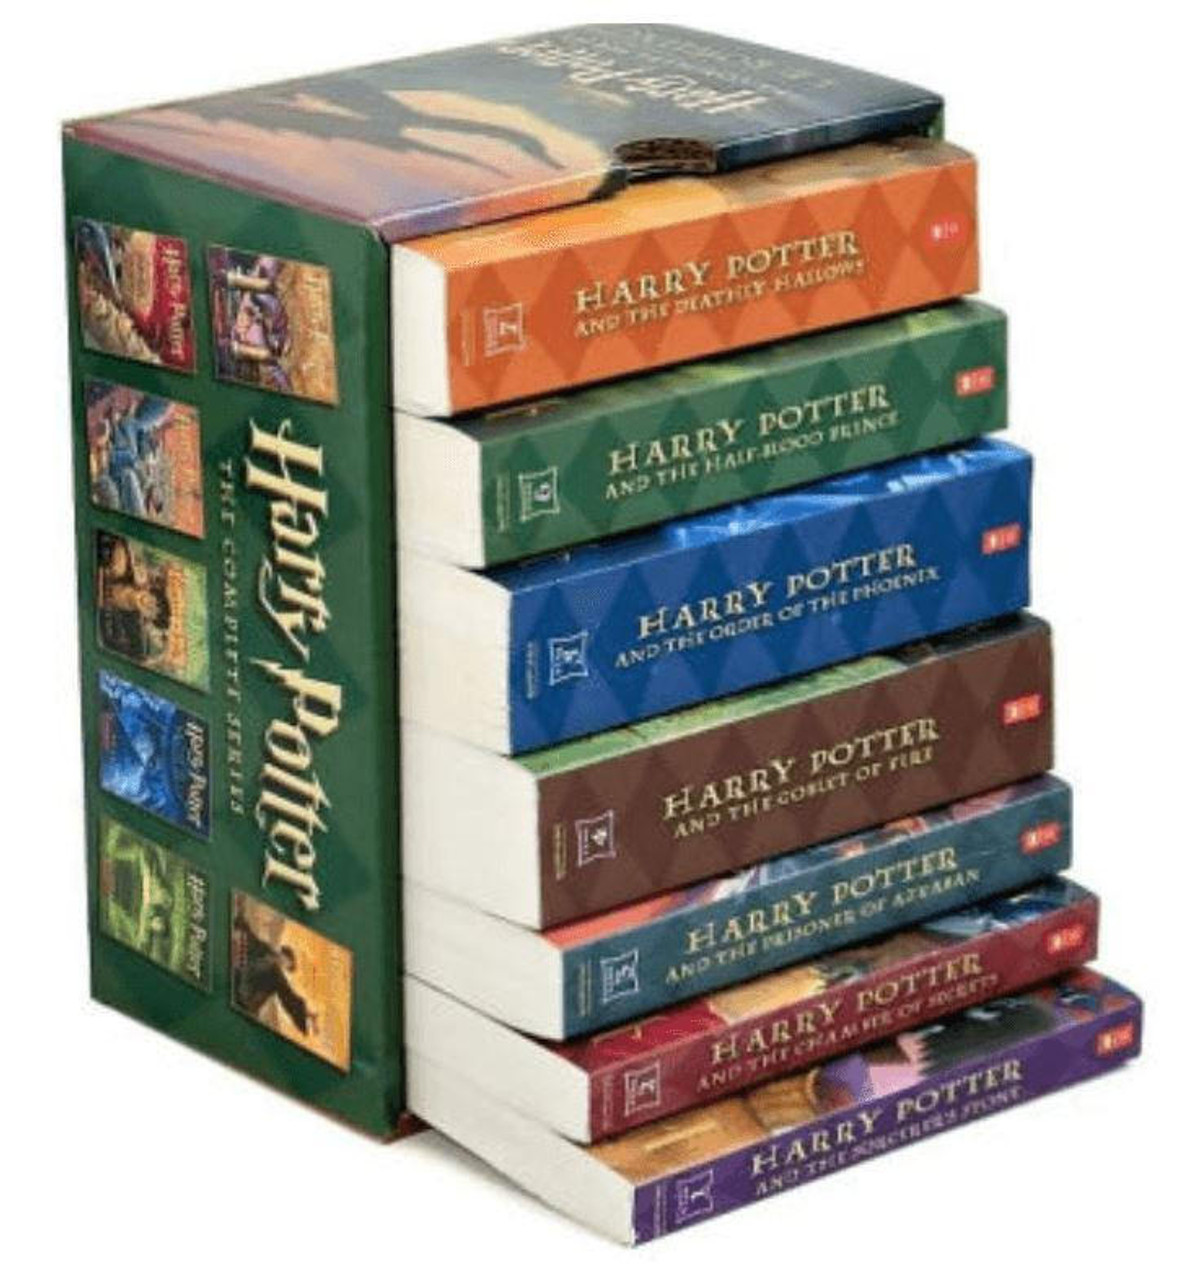 Harry Potter Hardcover Boxed Set (Books 1-7) by J.K. Rowling